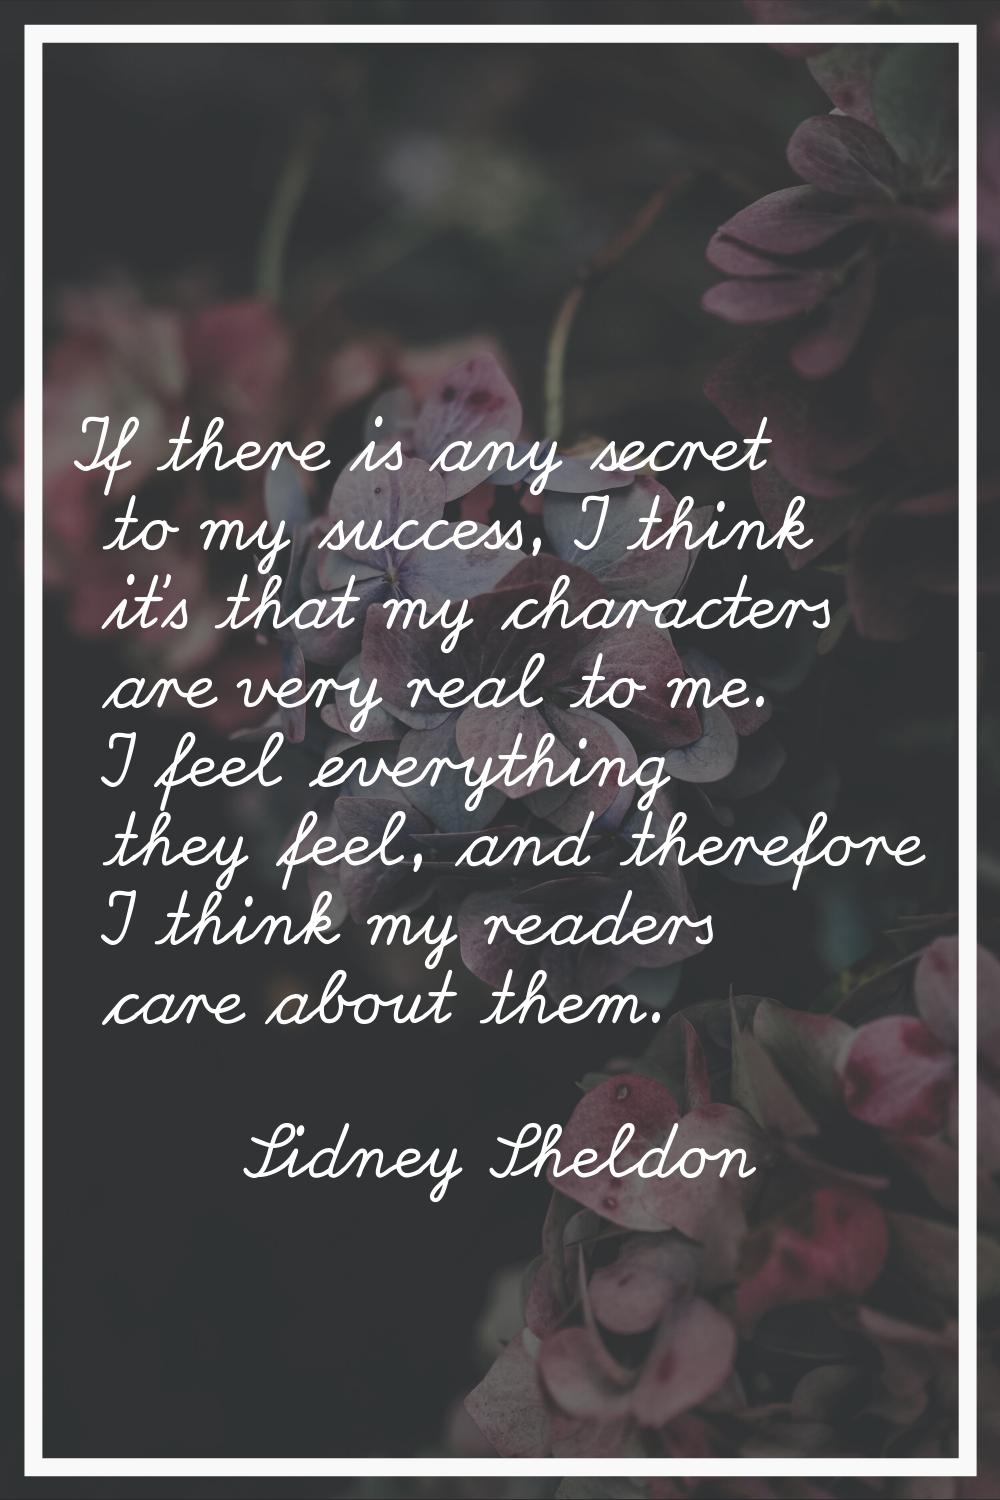 If there is any secret to my success, I think it's that my characters are very real to me. I feel e